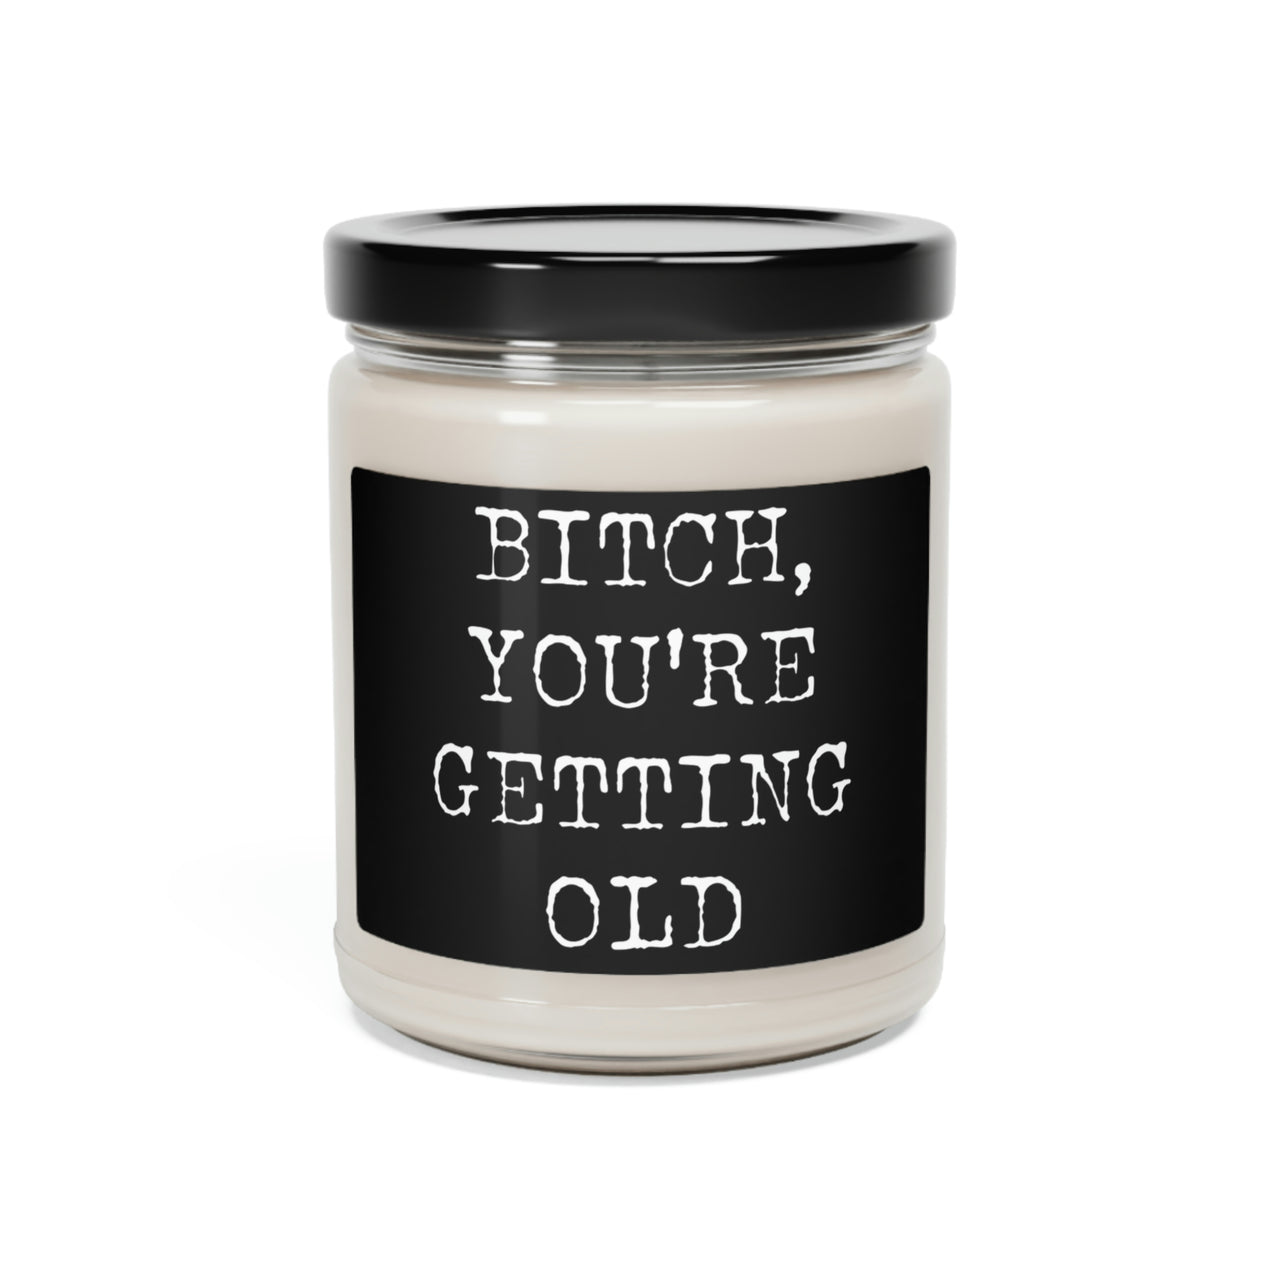 Bitch You're Getting Old Candle - Funny Sarcastic Birthday Candle Gift